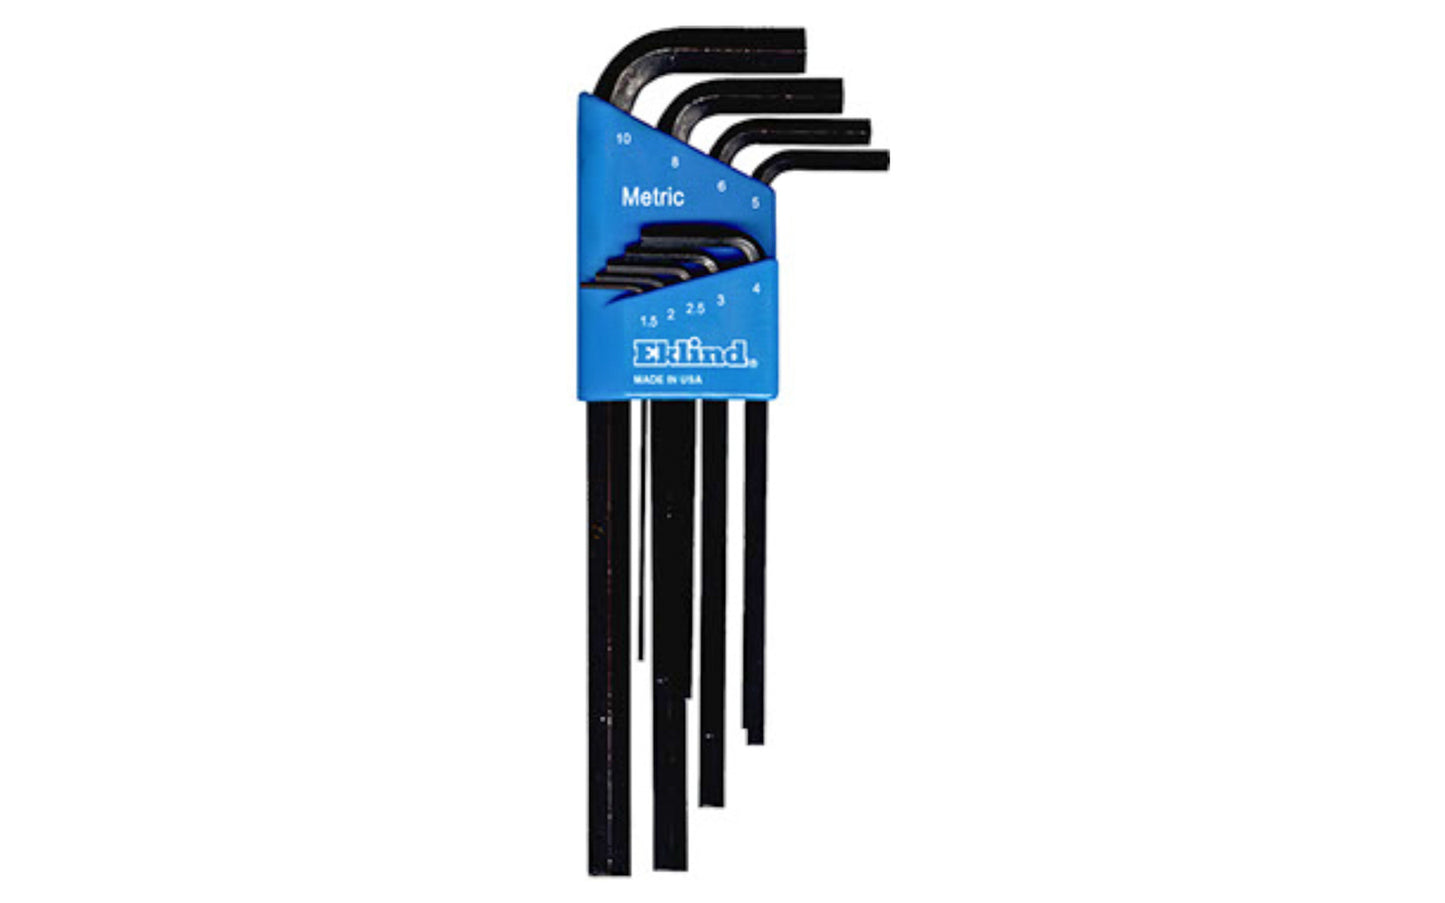 This Eklind 9-PC Hex-L Wrench Key Metric Set. 1.5 mm, 2 mm, 2.5 mm, 3 mm, 4 mm, 5 mm,  6 mm, 8 mm, & 10 mm sizes. Allen wrench set is made from the finest quality alloy steel. Hardened, tempered & finished with Eklind black finish to resist rust. Plastic holder firmly retains each key. Eklind model 10609. Made in USA.